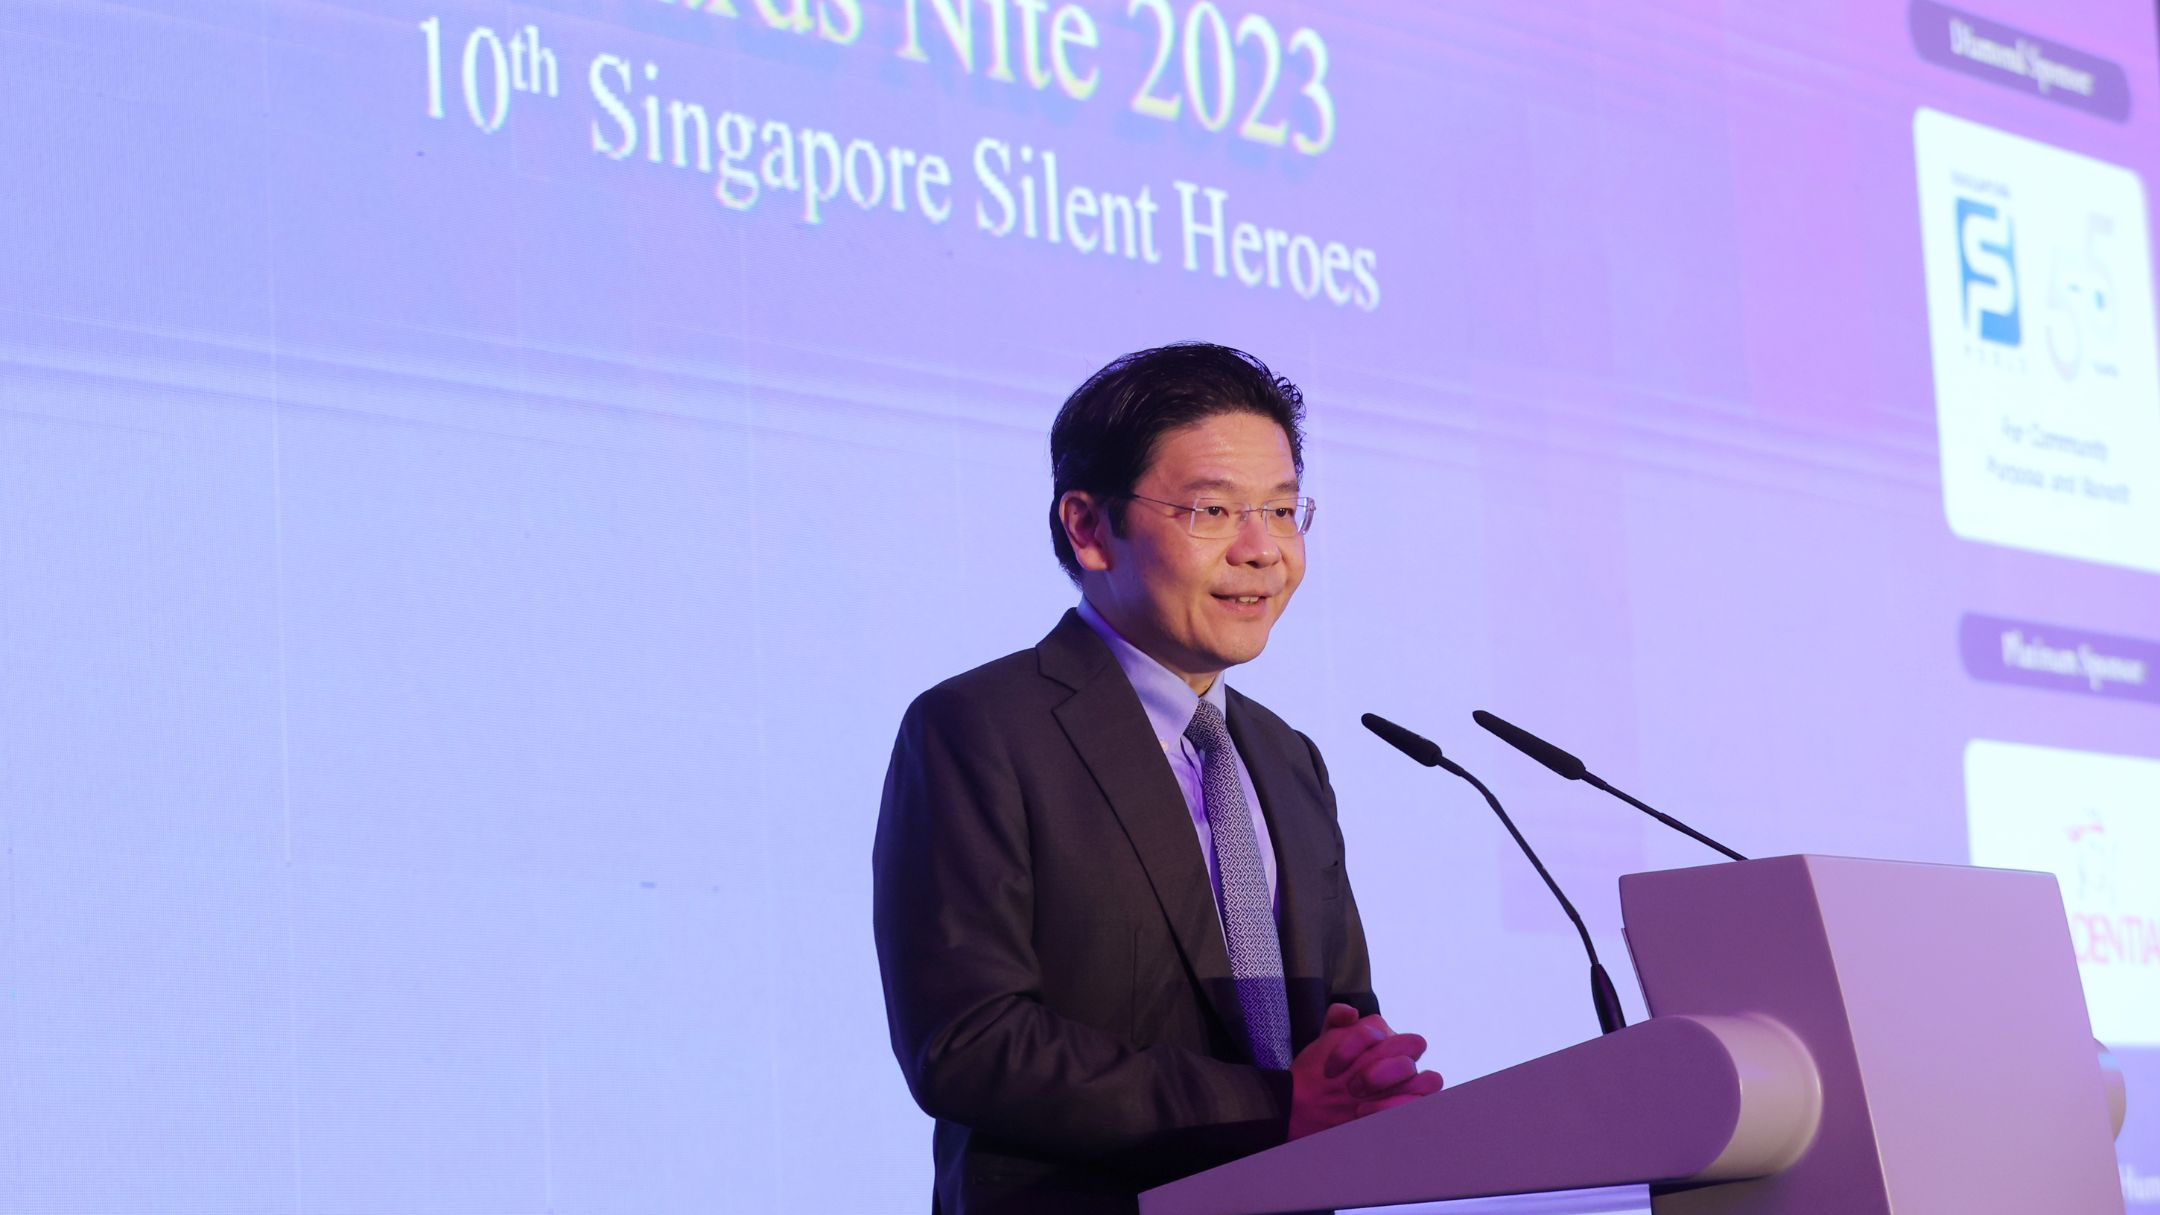 DPM Wong at the 10th Singapore Silent Heroes Awards_Feature jpg